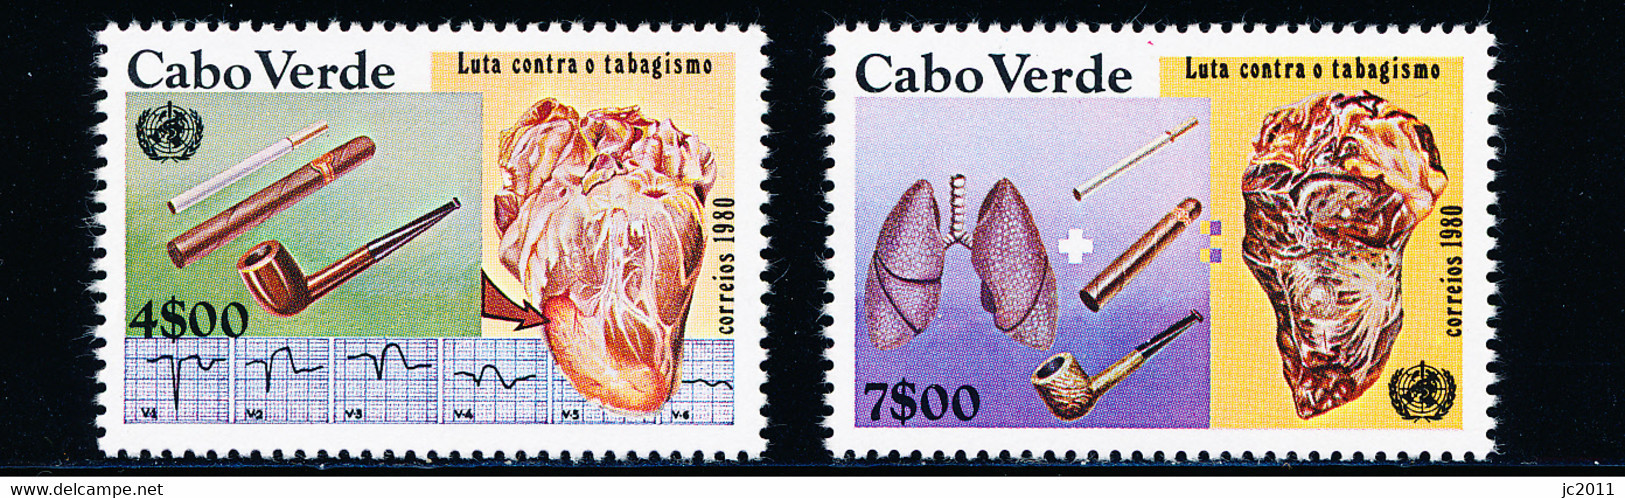 Cabo Verde - 1980 - Smoking / Fight Against - World Health Day - MNH - Cap Vert